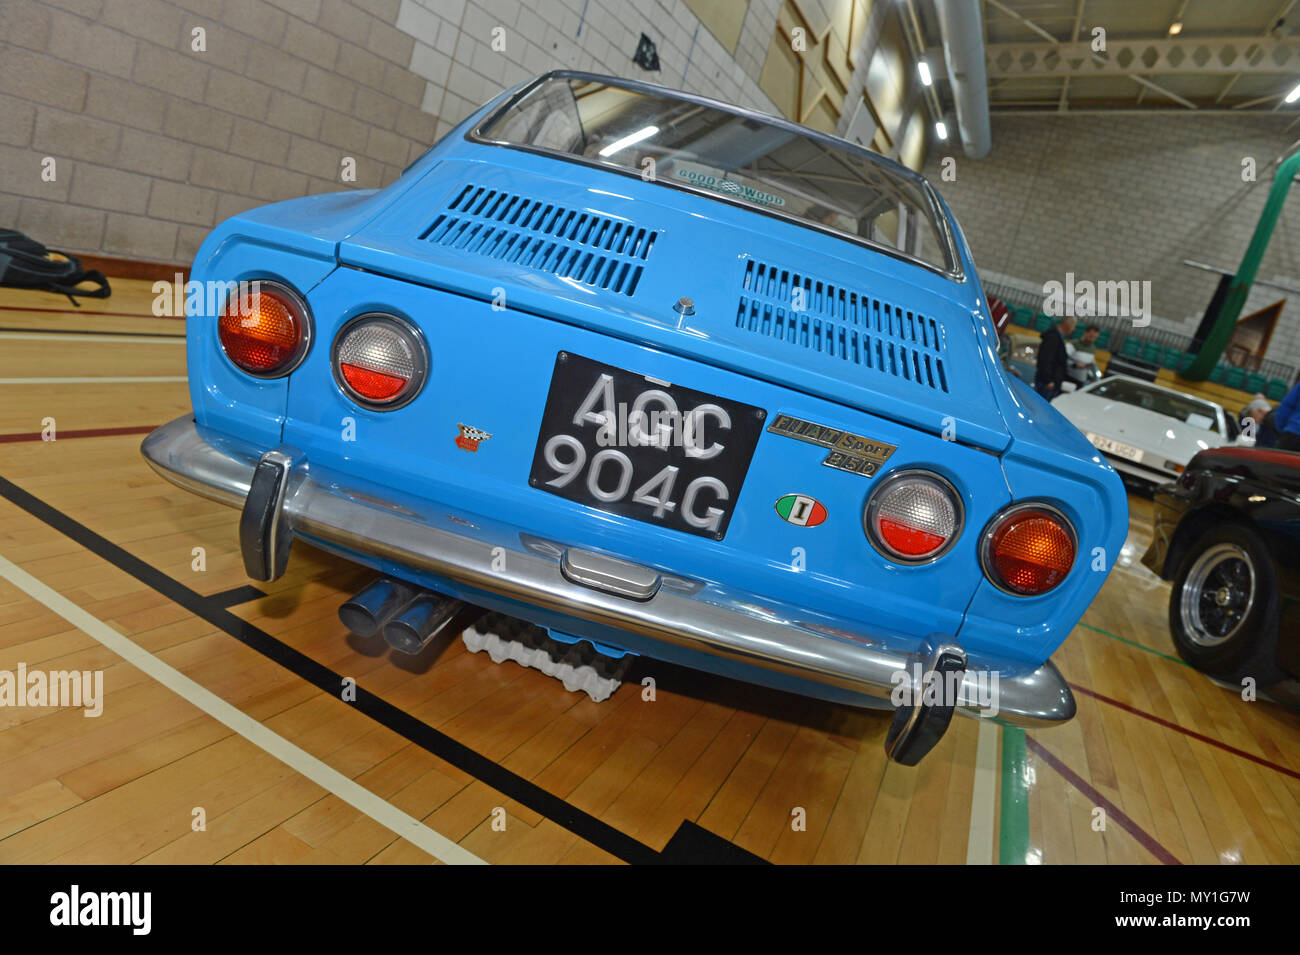 Fiat 850 Coupe Sport also known as the baby Ferrari at the Shetland Classic Car show 2018 Stock Photo